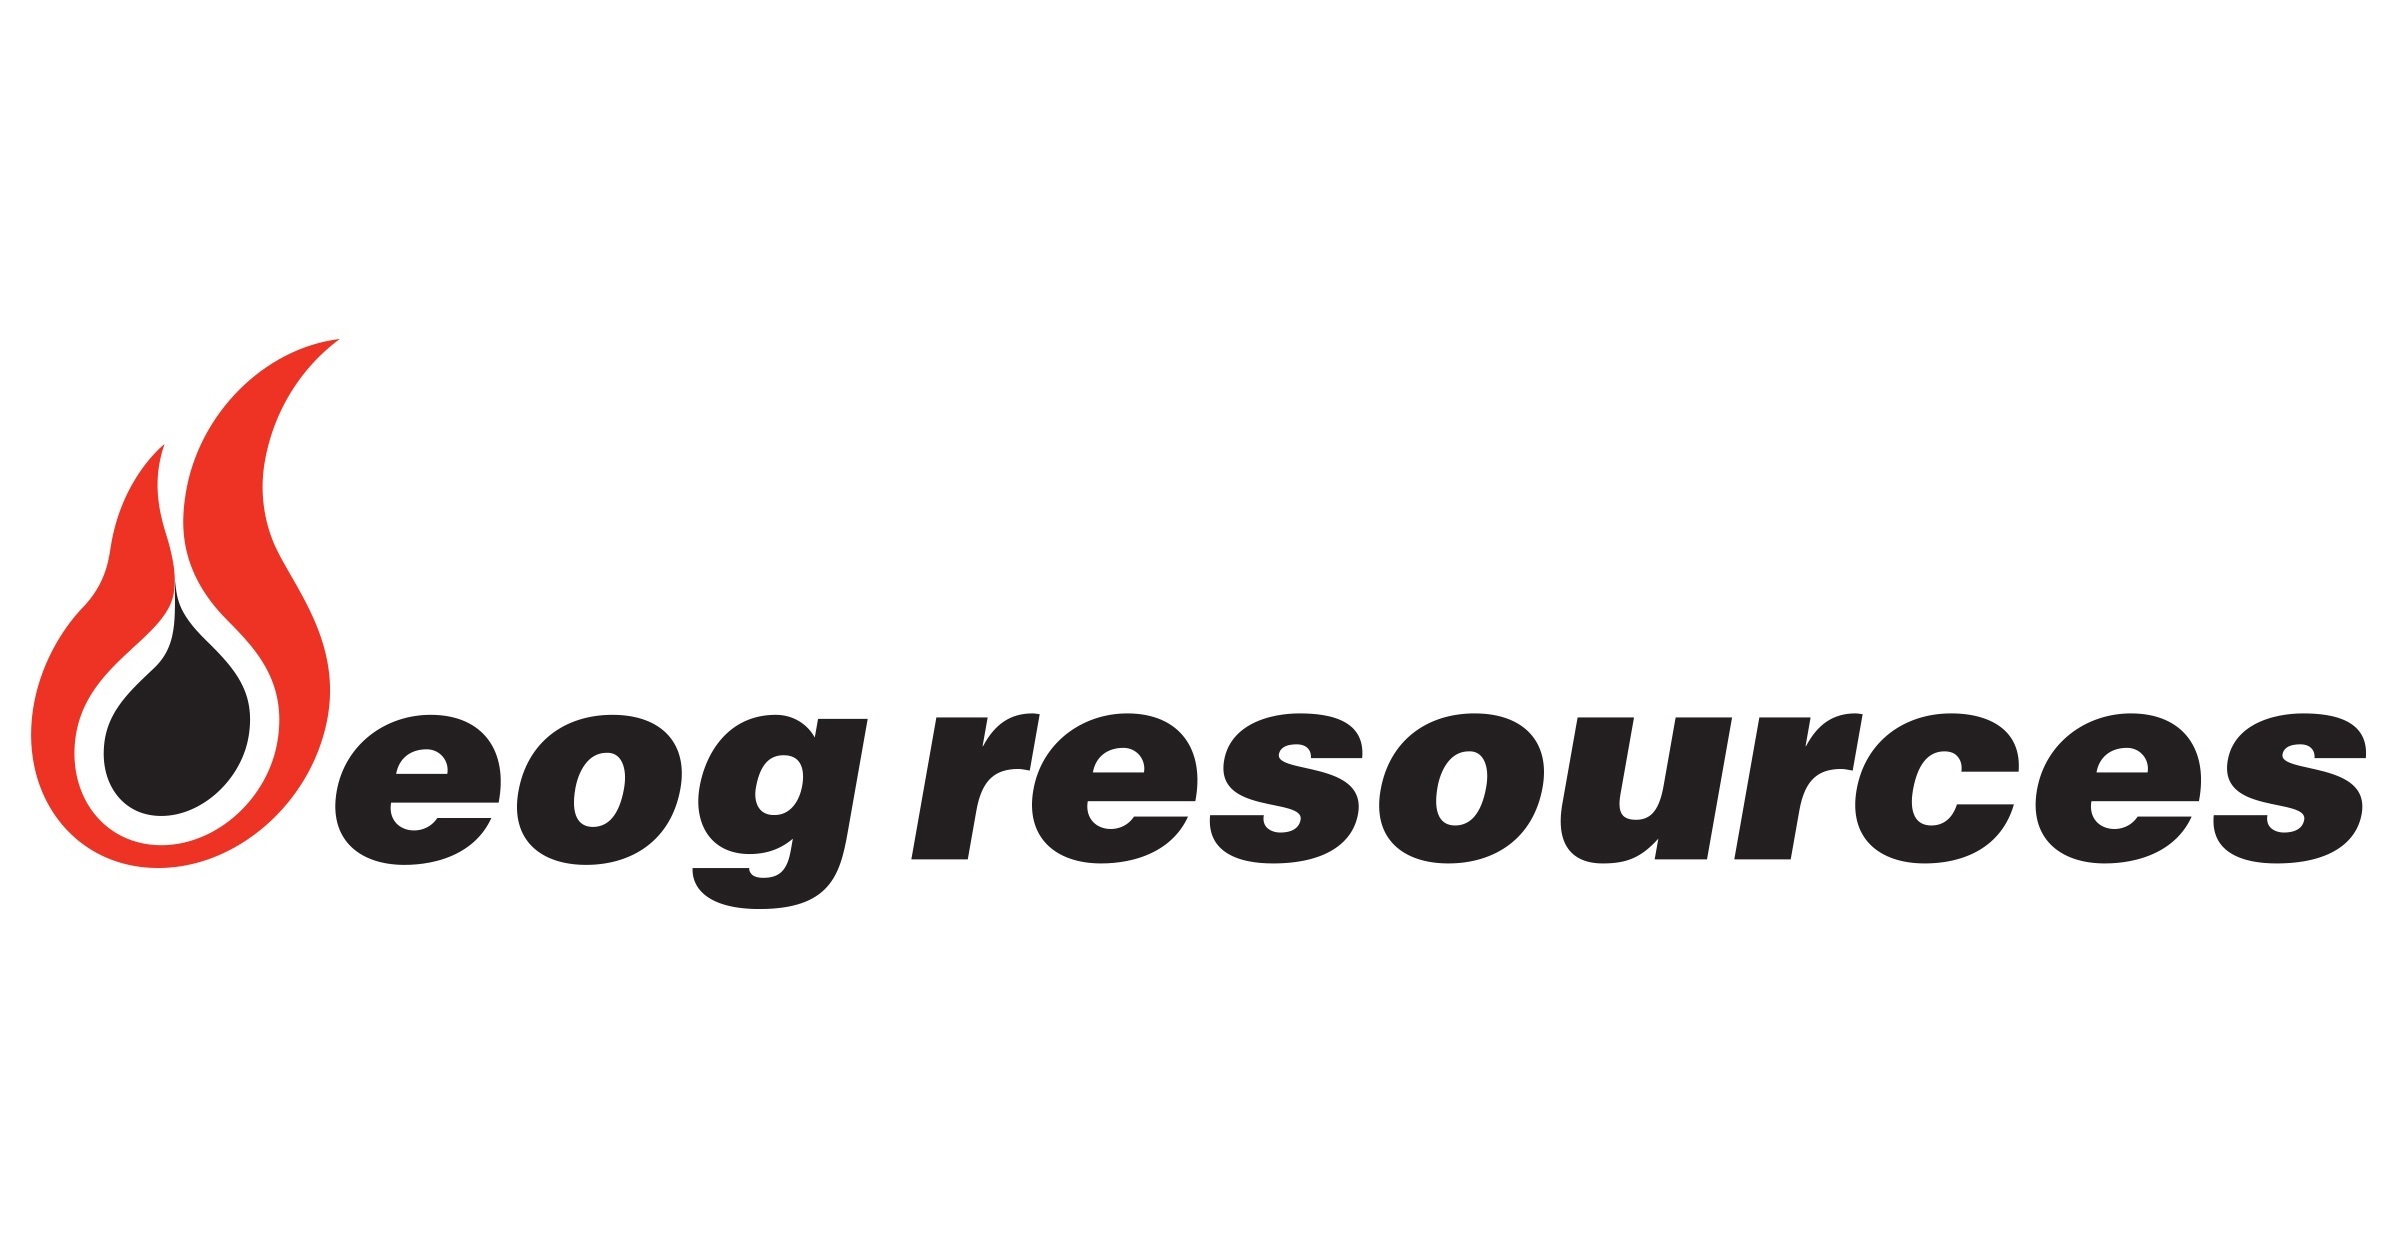 eog resources reports third quarter 2020 results; adds premium natural gas play in south texas; provides three-year outlook